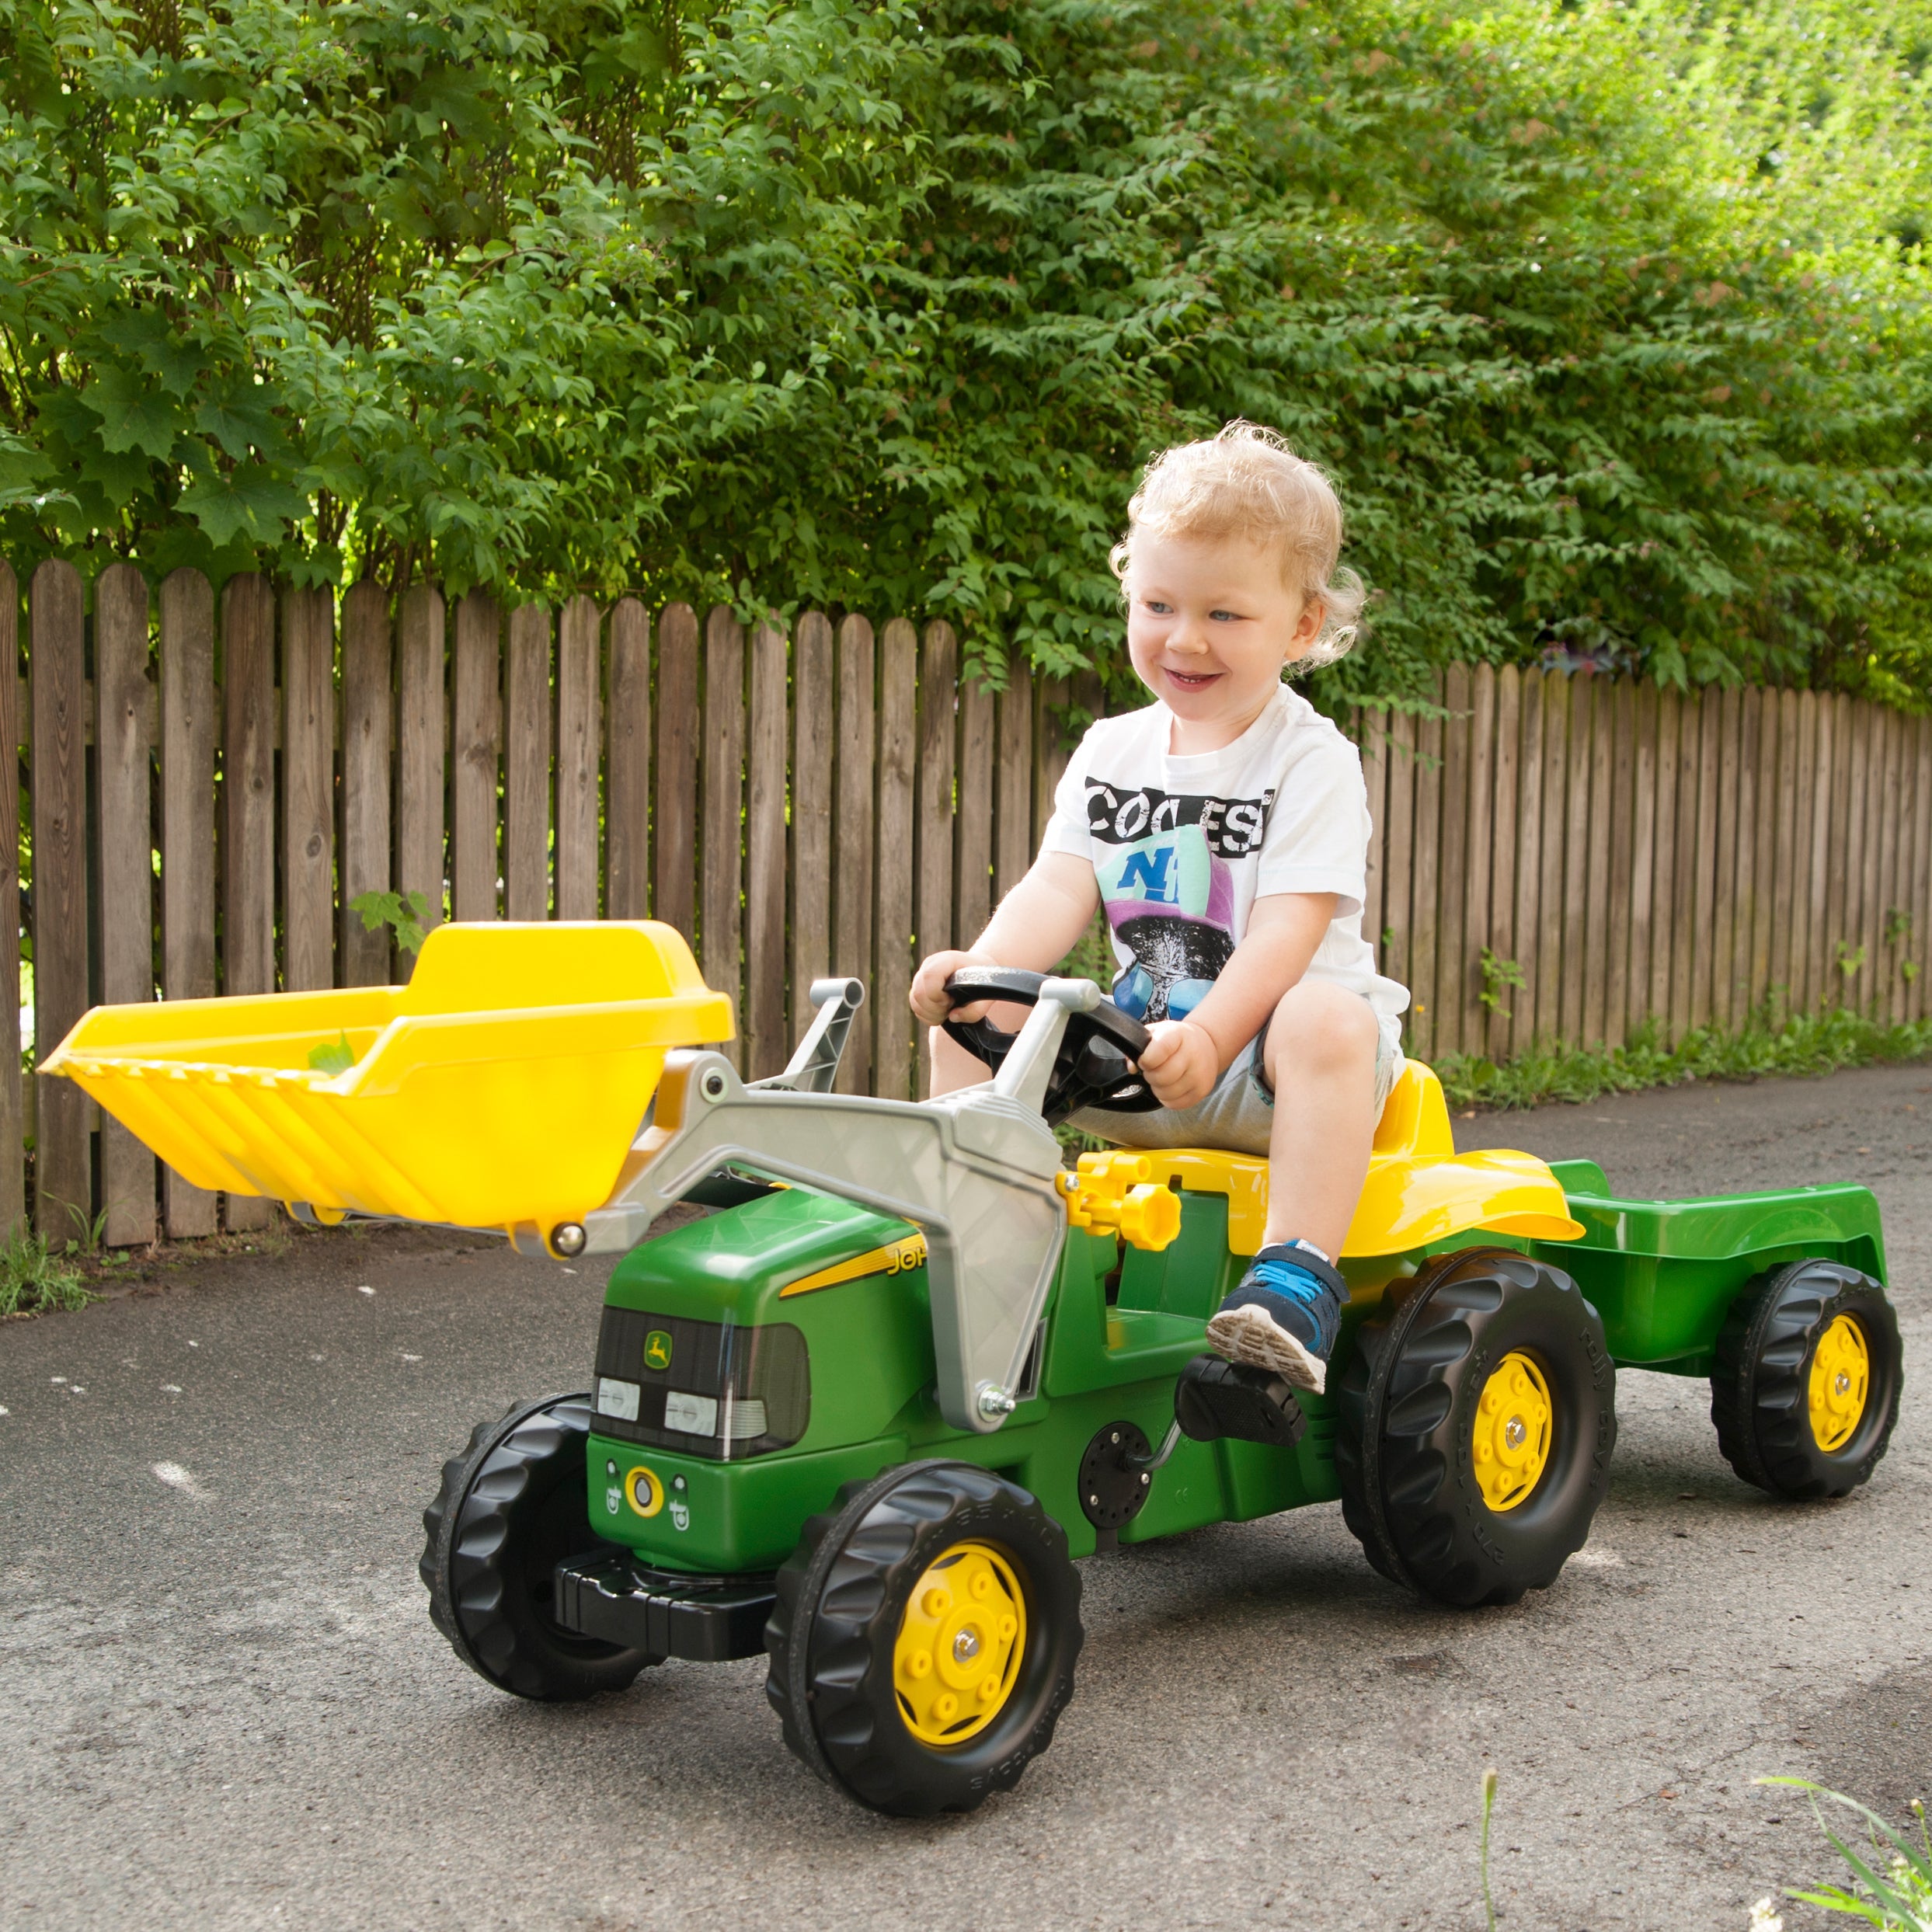 lifestyle image of child riding JD ride on vehicle with functional front loader 